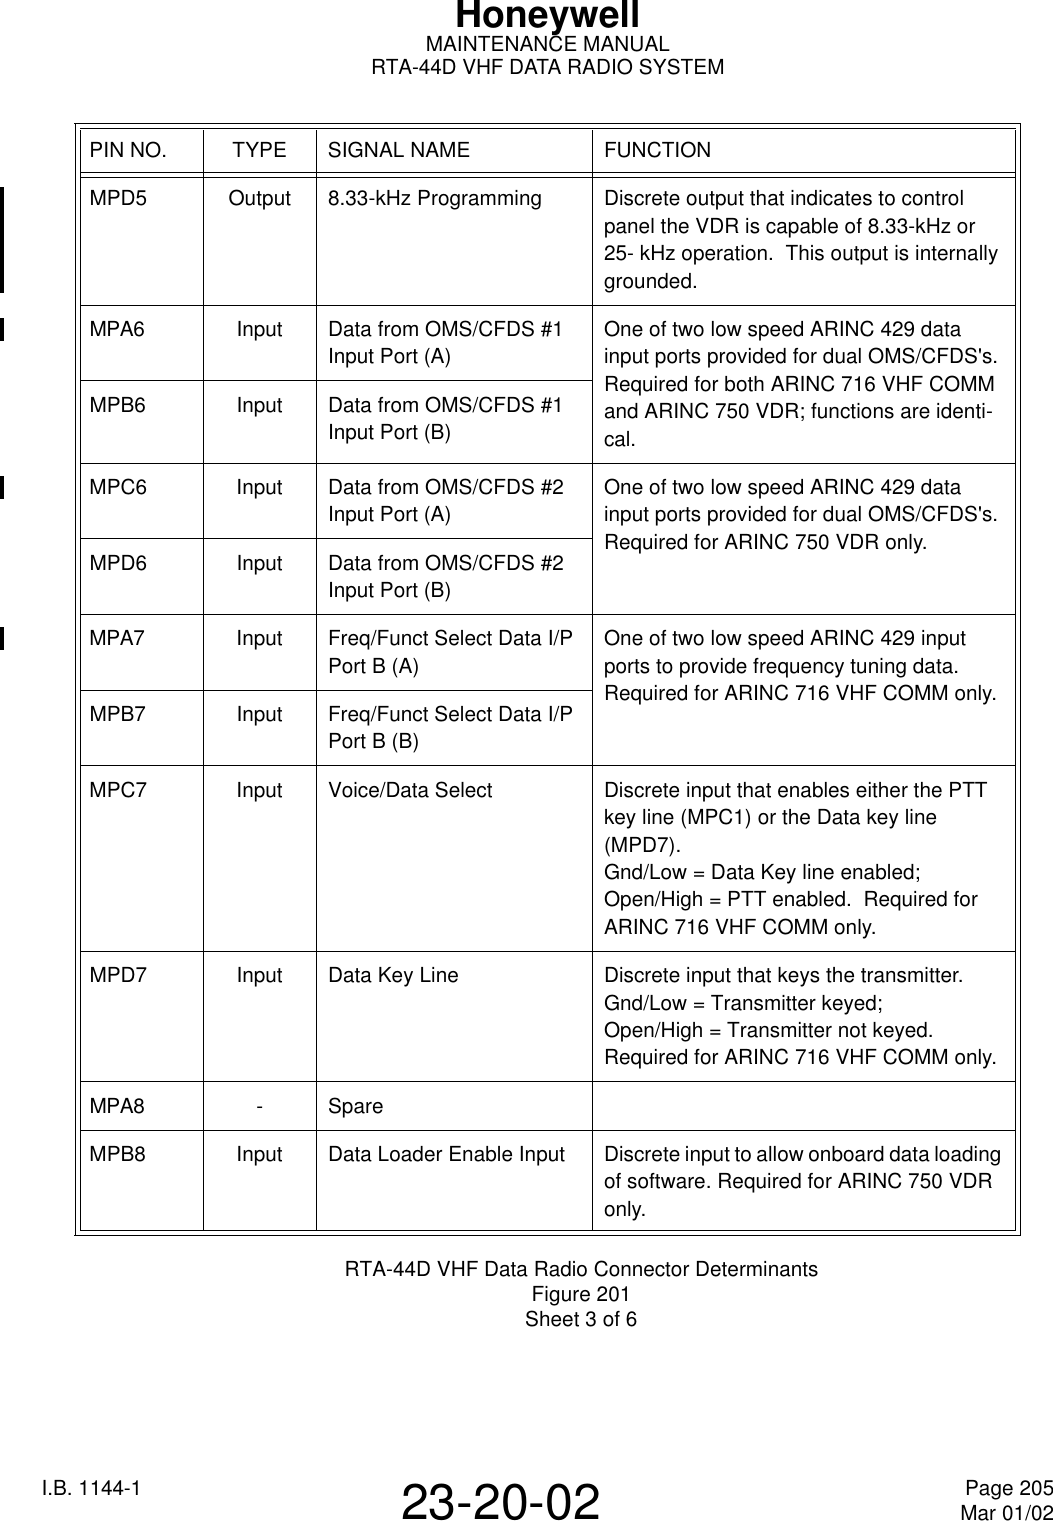 I.B. 1144-1 Page 205Mar 01/0223-20-02HoneywellMAINTENANCE MANUALRTA-44D VHF DATA RADIO SYSTEMRTA-44D VHF Data Radio Connector DeterminantsFigure 201Sheet 3 of 6PIN NO. TYPE SIGNAL NAME FUNCTIONMPD5 Output 8.33-kHz Programming Discrete output that indicates to control panel the VDR is capable of 8.33-kHz or 25- kHz operation.  This output is internally grounded.MPA6 Input Data from OMS/CFDS #1 Input Port (A)One of two low speed ARINC 429 data input ports provided for dual OMS/CFDS&apos;s.Required for both ARINC716 VHF COMM and ARINC750 VDR; functions are identi-cal.MPB6 Input Data from OMS/CFDS #1 Input Port (B)MPC6 Input Data from OMS/CFDS #2 Input Port (A)One of two low speed ARINC 429 data input ports provided for dual OMS/CFDS&apos;s.Required for ARINC750 VDR only.MPD6 Input Data from OMS/CFDS #2 Input Port (B)MPA7 Input Freq/Funct Select Data I/P Port B (A)One of two low speed ARINC 429 input ports to provide frequency tuning data.  Required for ARINC716 VHF COMM only.MPB7 Input Freq/Funct Select Data I/P Port B (B)MPC7 Input Voice/Data Select Discrete input that enables either the PTT key line (MPC1) or the Data key line (MPD7).Gnd/Low=Data Key line enabled; Open/High=PTT enabled.  Required for ARINC716 VHF COMM only.MPD7 Input Data Key Line Discrete input that keys the transmitter.Gnd/Low=Transmitter keyed; Open/High=Transmitter not keyed.  Required for ARINC716 VHF COMM only.MPA8 -SpareMPB8 Input Data Loader Enable Input Discrete input to allow onboard data loading of software. Required for ARINC750 VDR only.